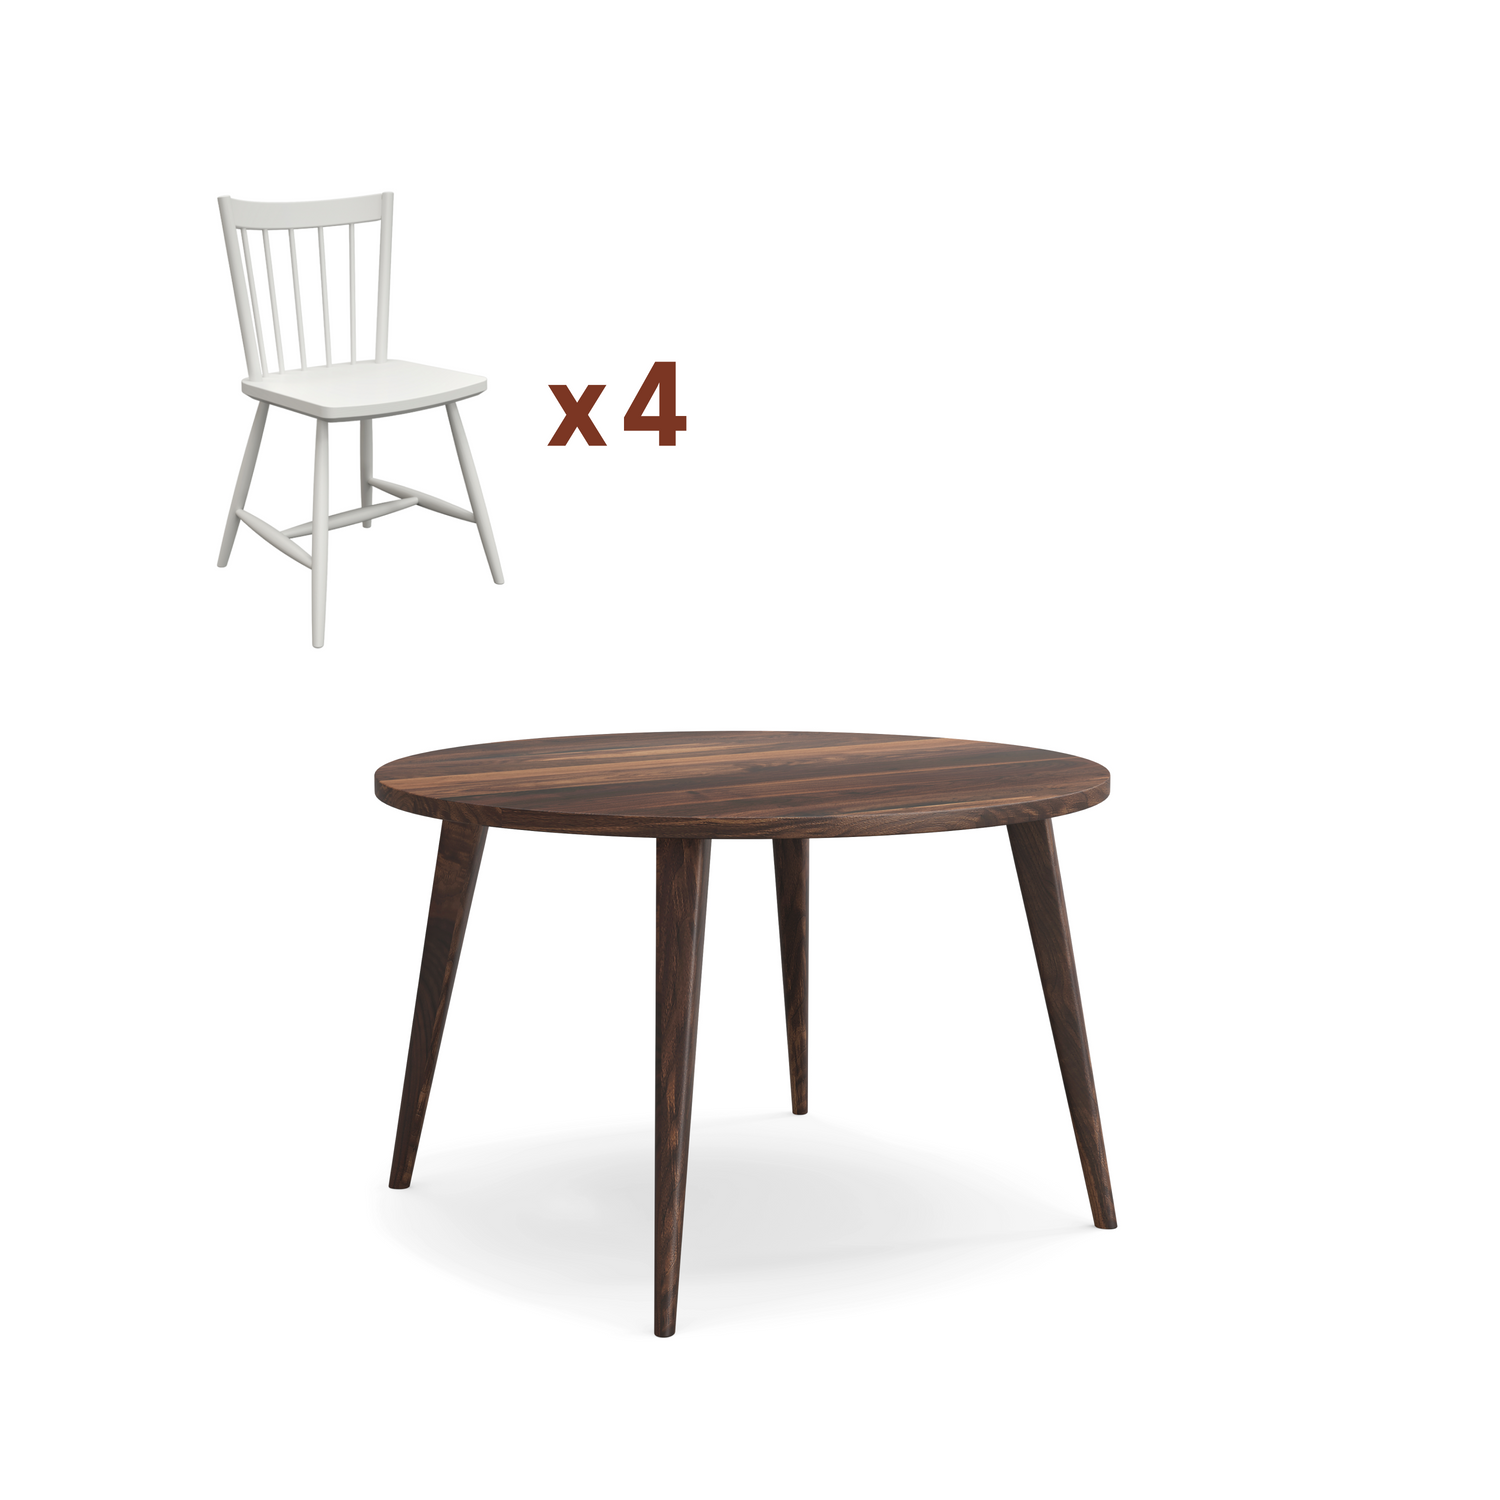 Round Oslo table + chairs